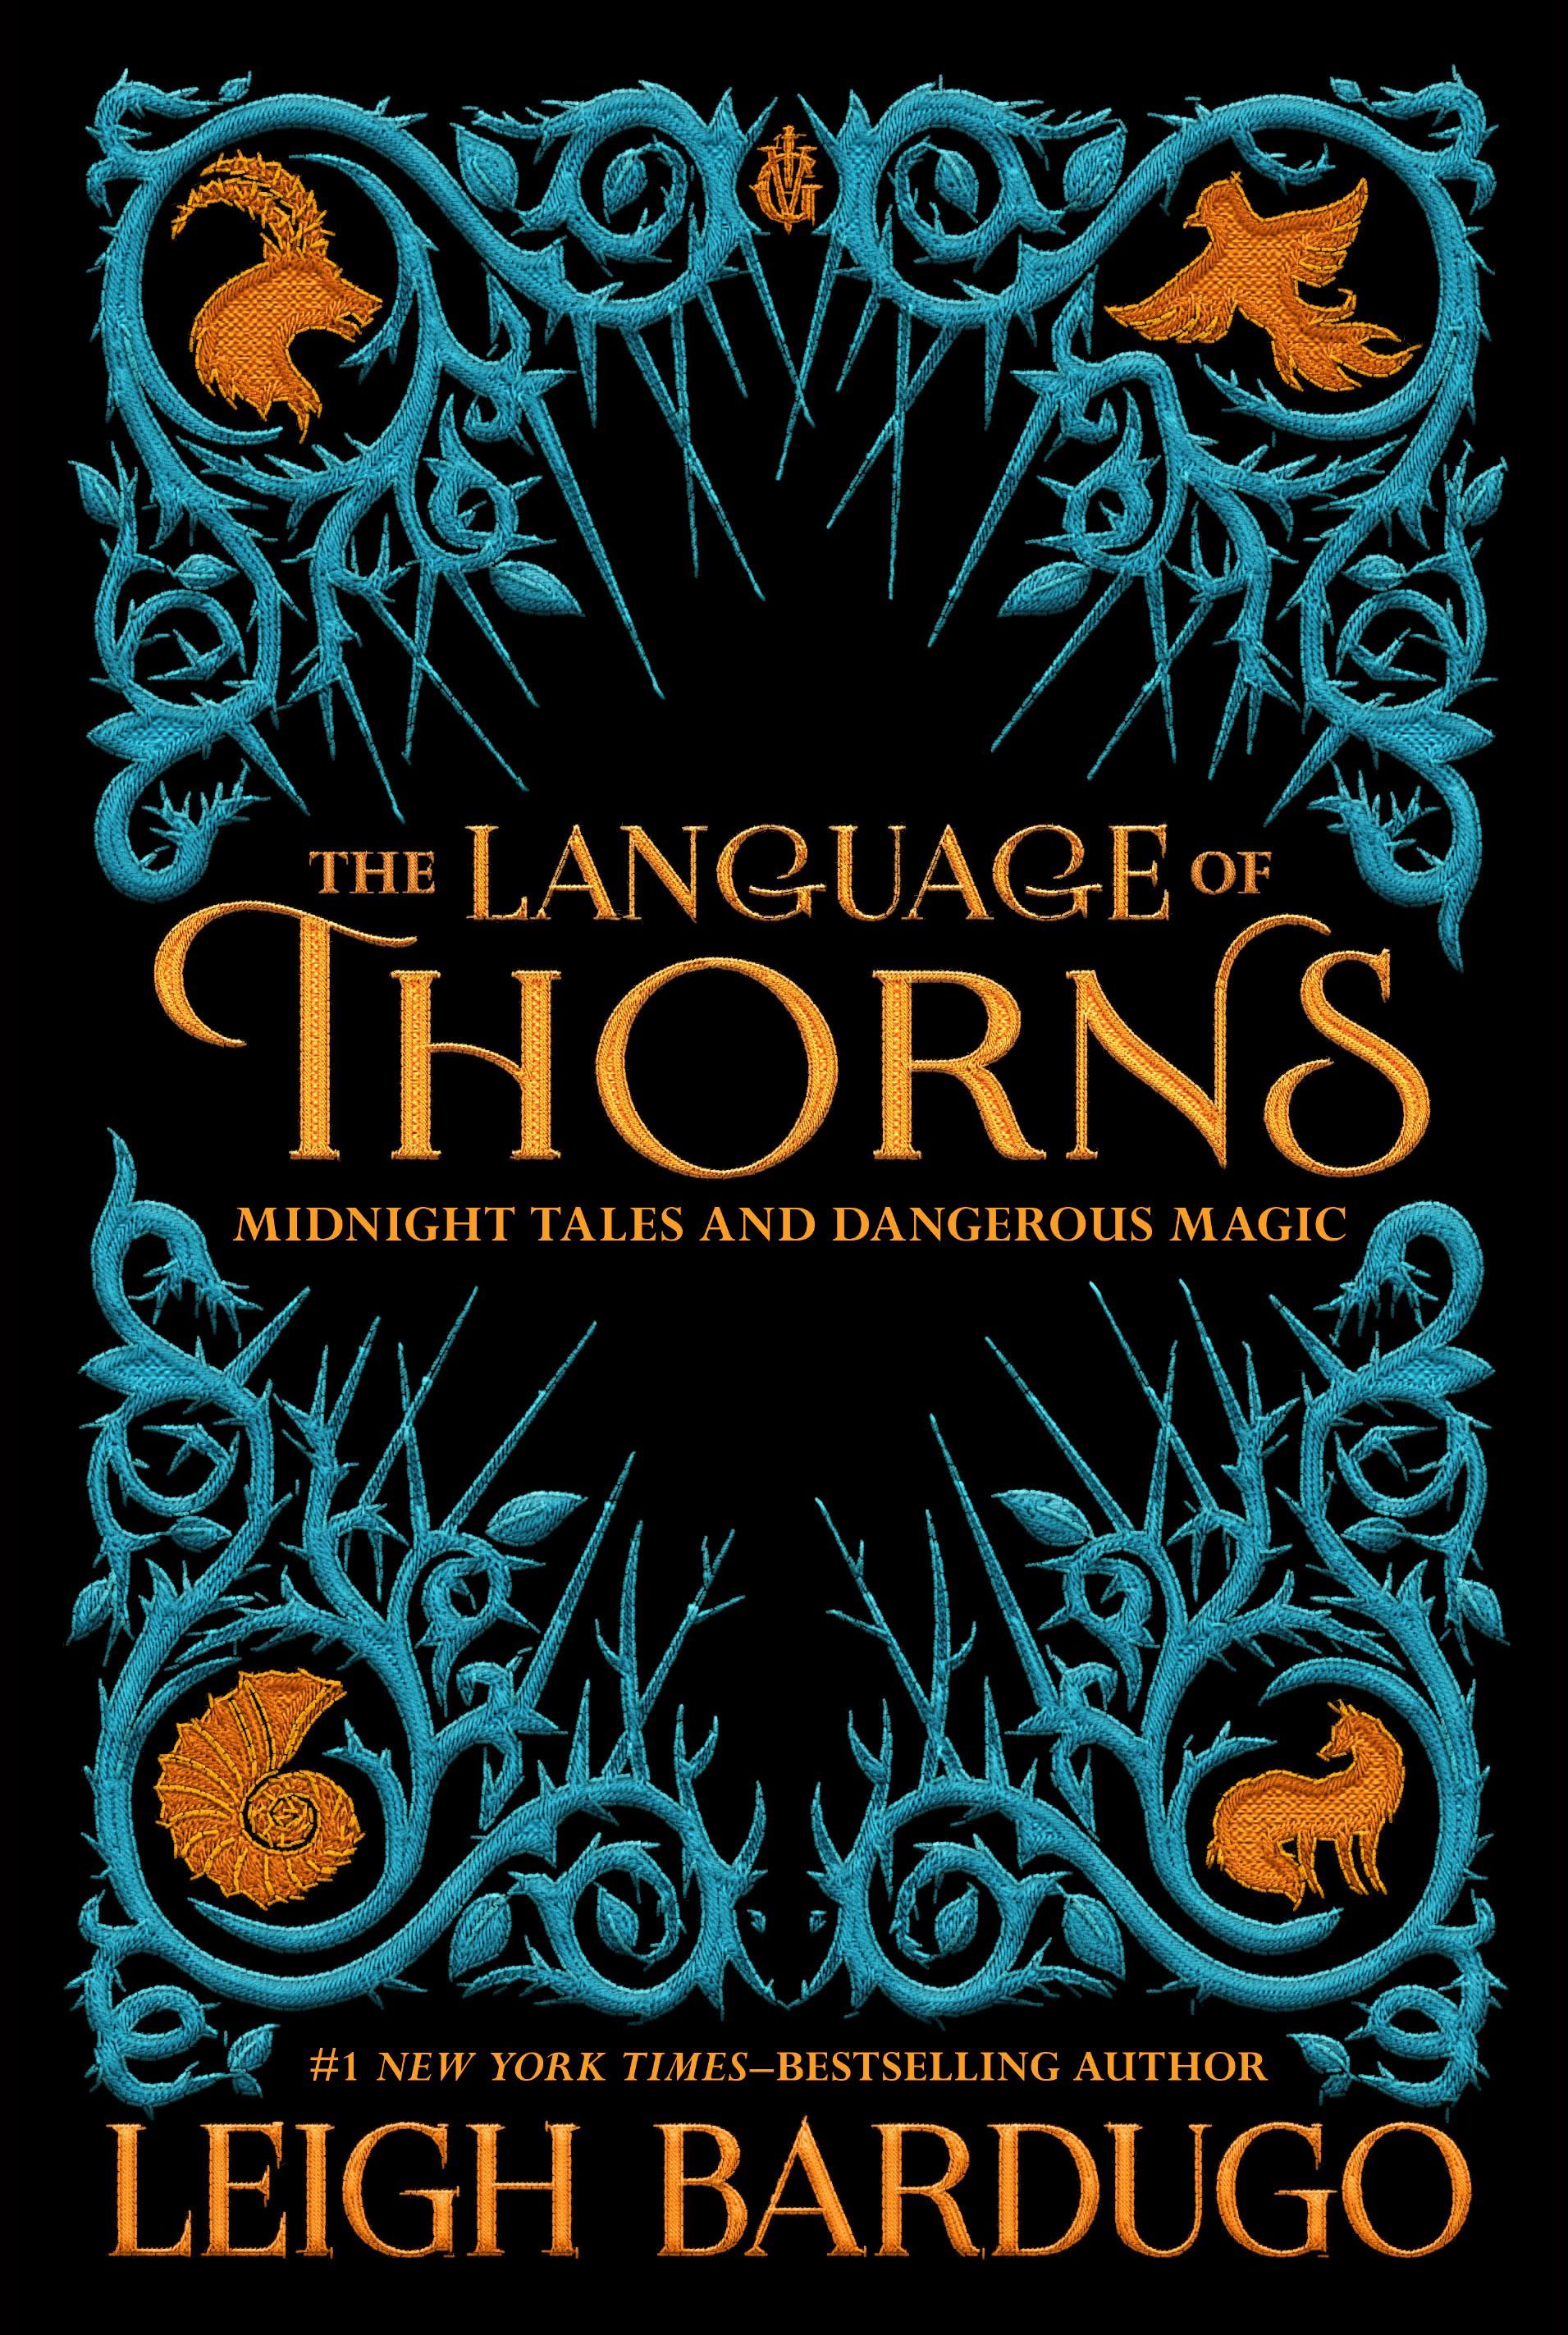 "The Language of Thorns: Midnight Tales and Dangerous Magic"